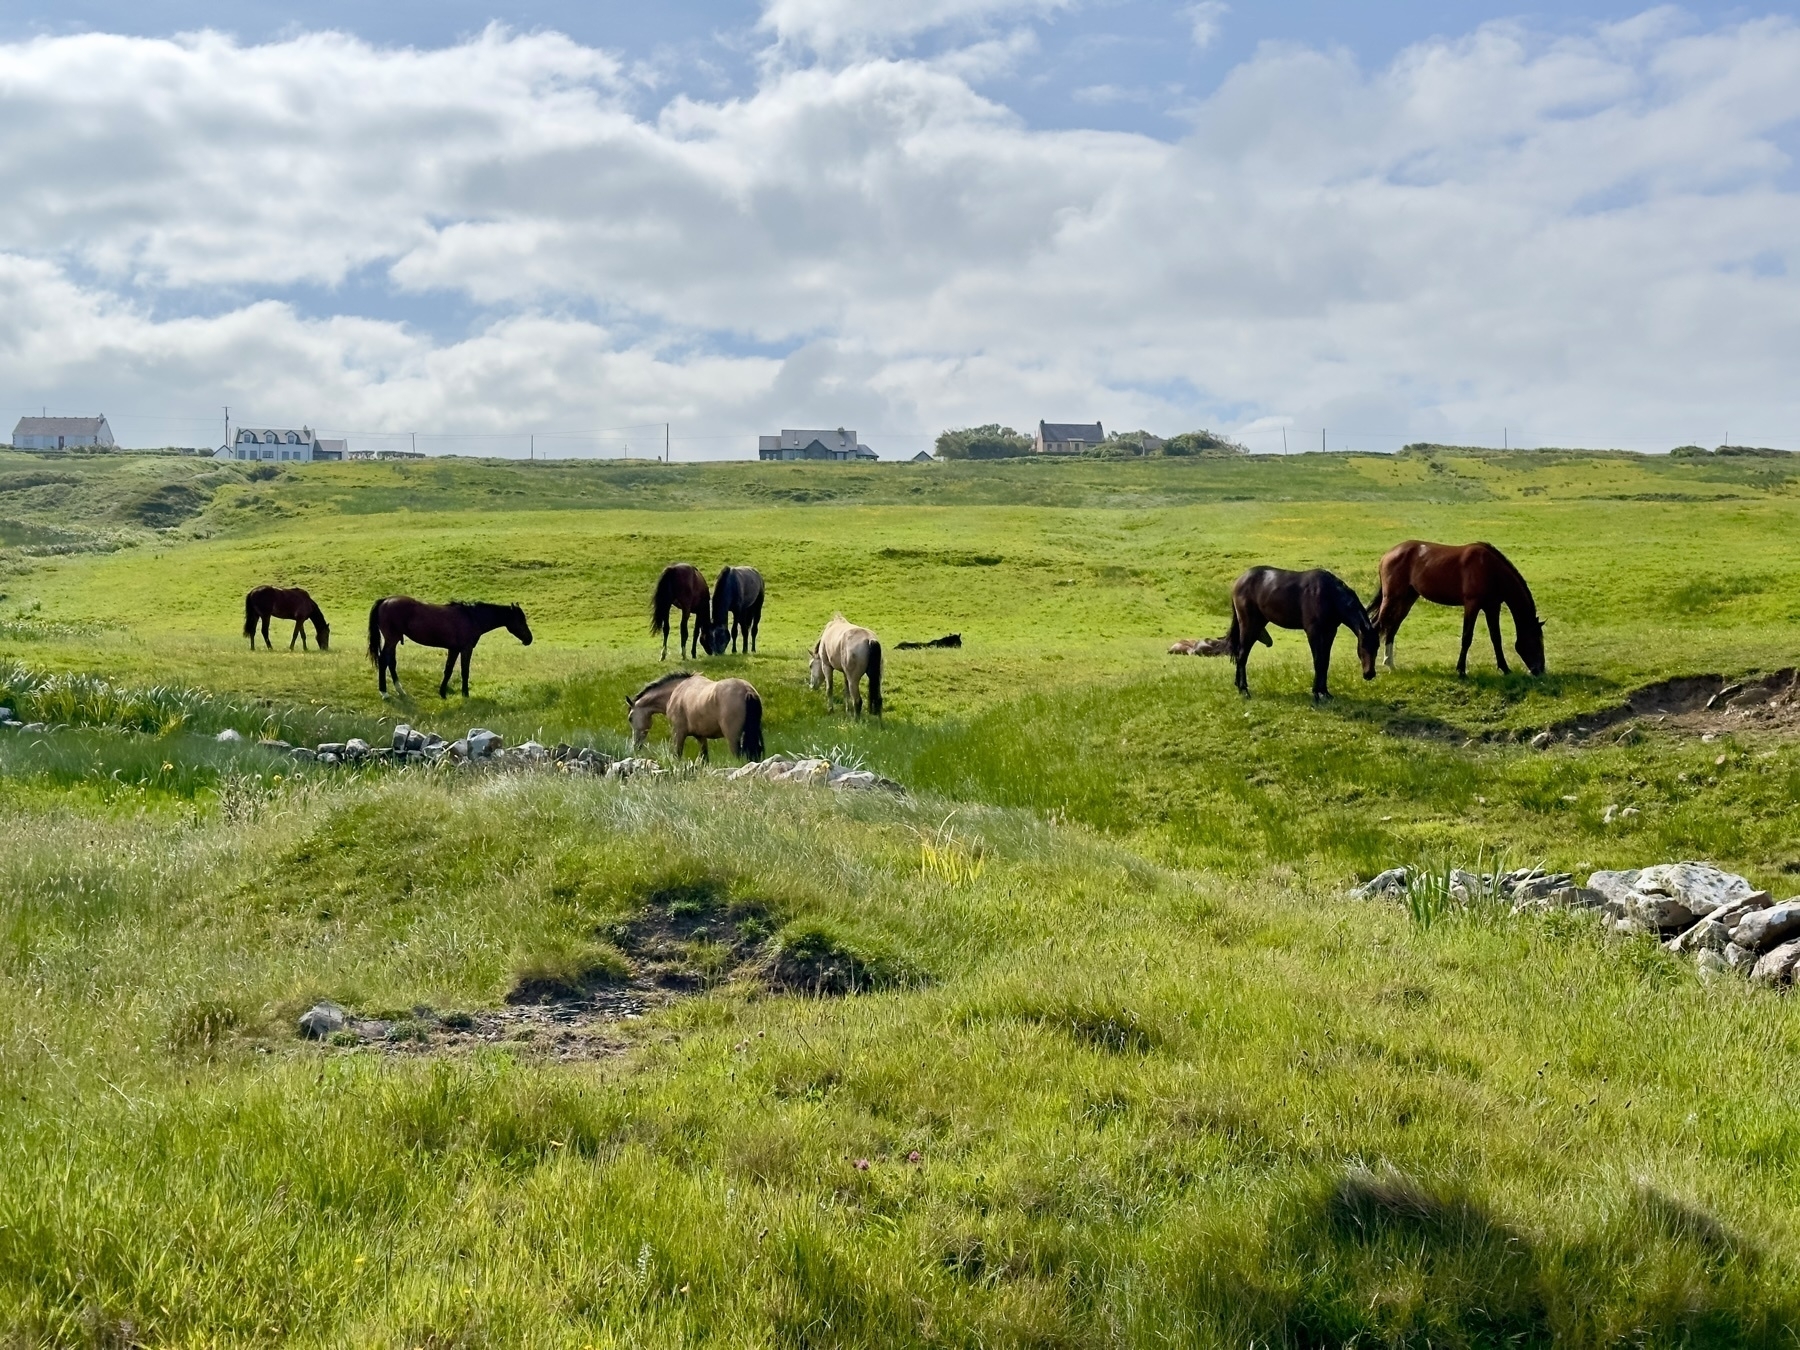 Auto-generated description: A group of horses grazes peacefully on a lush, green hillside under a partly cloudy sky, with houses visible in the distance.